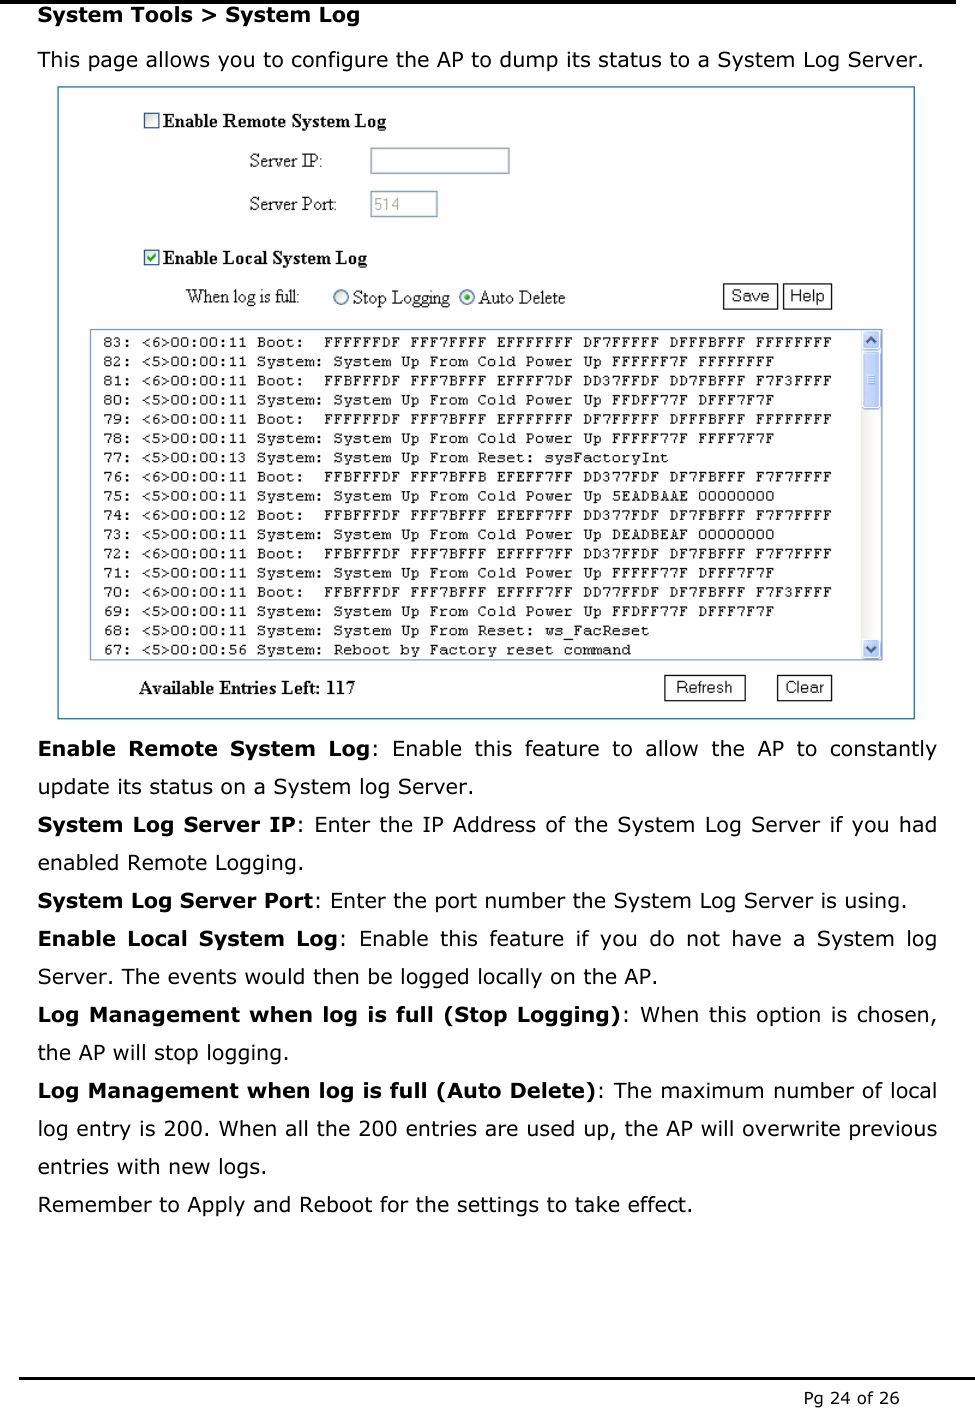  Pg 24 of 26 System Tools &gt; System Log This page allows you to configure the AP to dump its status to a System Log Server.  Enable Remote System Log: Enable this feature to allow the AP to constantly update its status on a System log Server.  System Log Server IP: Enter the IP Address of the System Log Server if you had enabled Remote Logging. System Log Server Port: Enter the port number the System Log Server is using. Enable Local System Log: Enable this feature if you do not have a System log Server. The events would then be logged locally on the AP. Log Management when log is full (Stop Logging): When this option is chosen, the AP will stop logging. Log Management when log is full (Auto Delete): The maximum number of local log entry is 200. When all the 200 entries are used up, the AP will overwrite previous entries with new logs. Remember to Apply and Reboot for the settings to take effect. 